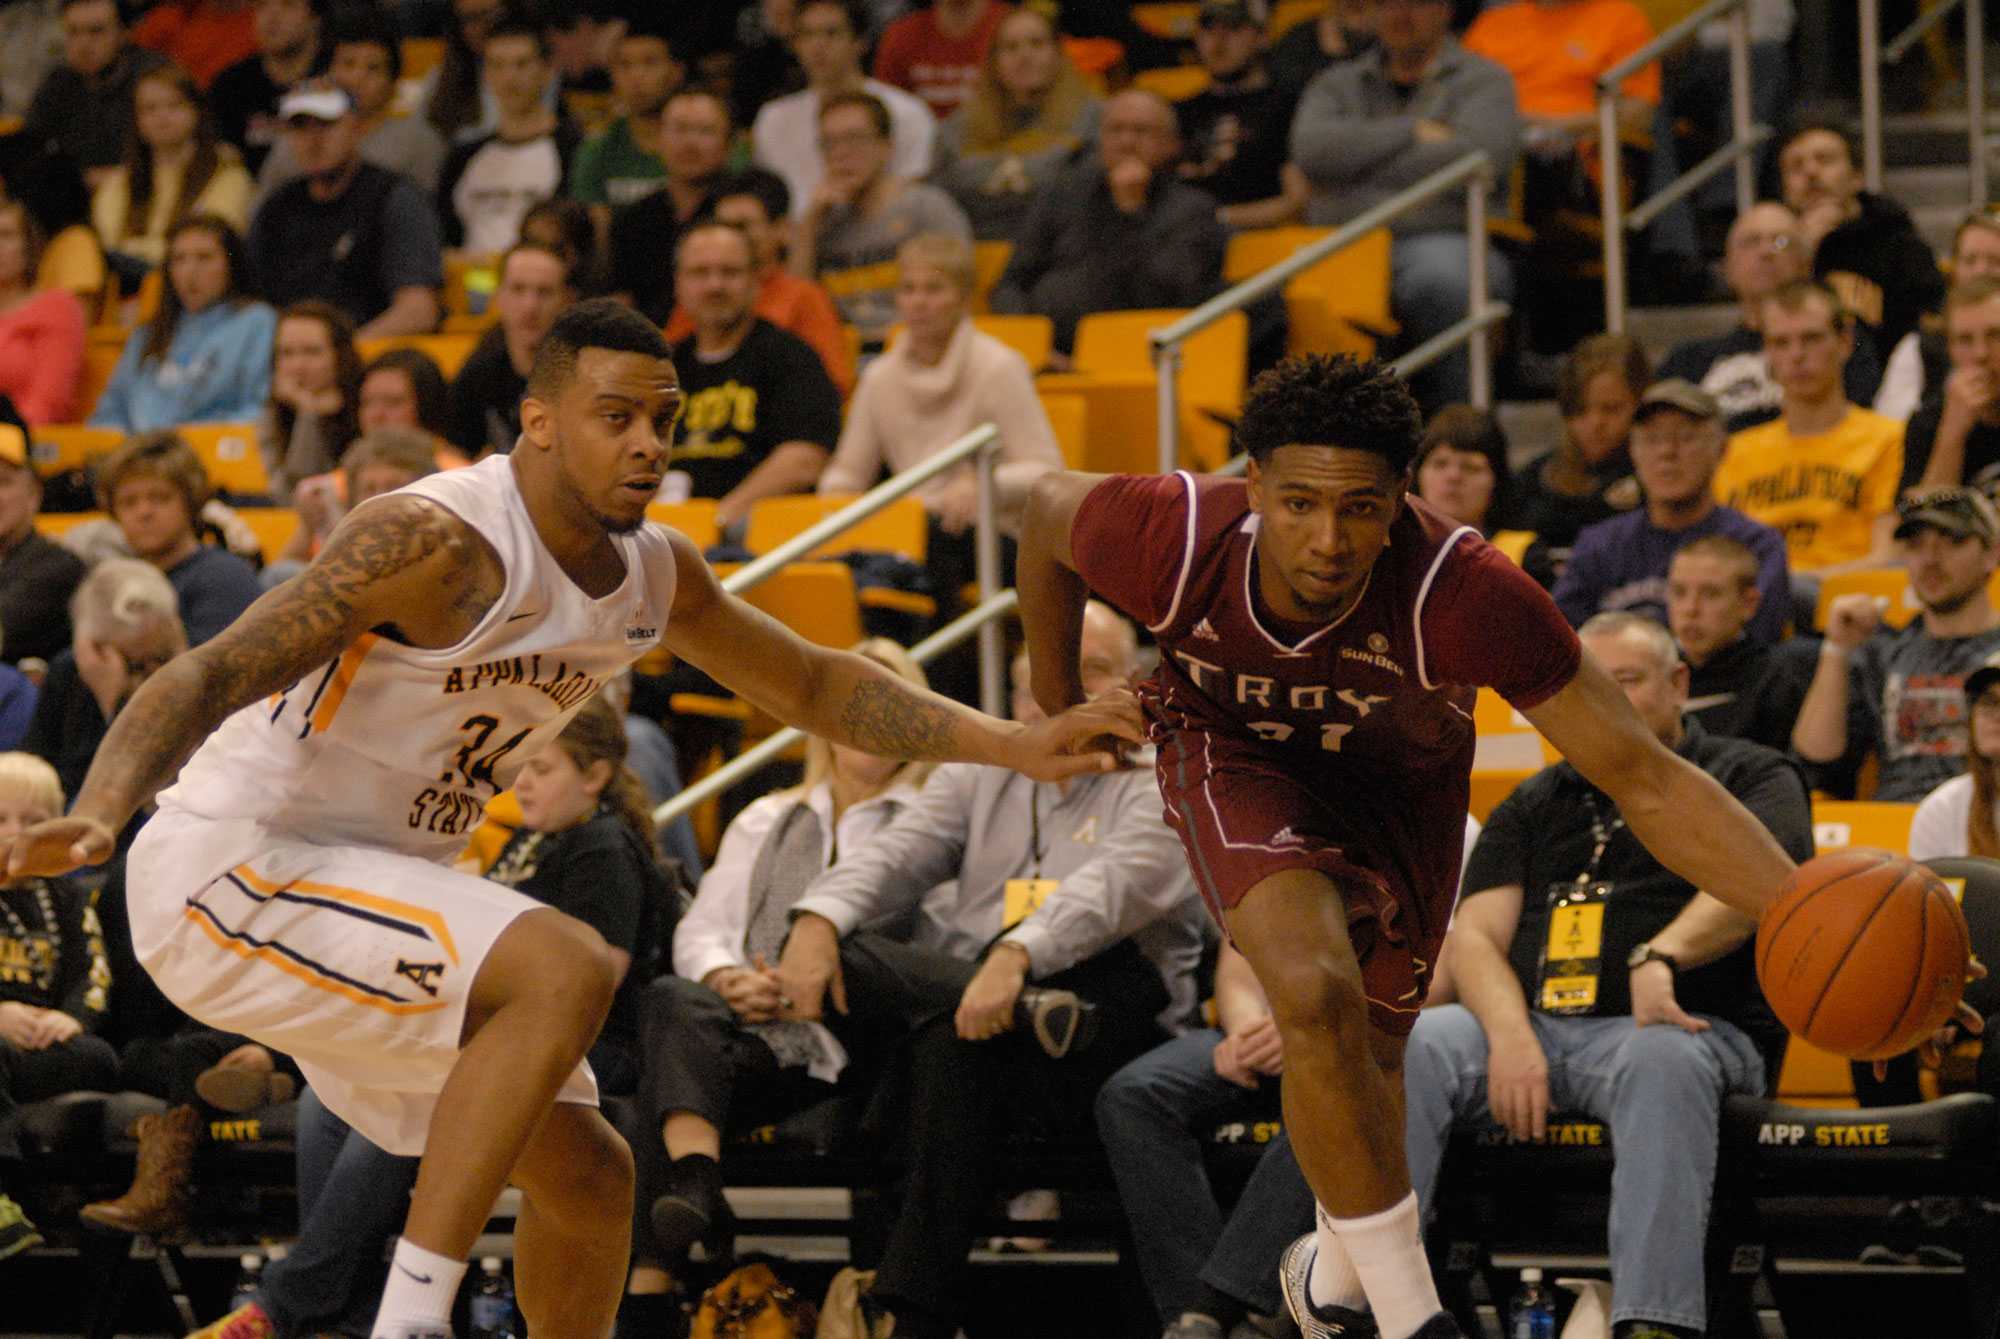 The Mountaineers narrowly defeated the Trojans 65-62. Photo by Corey Spiers  |  The Appalachian